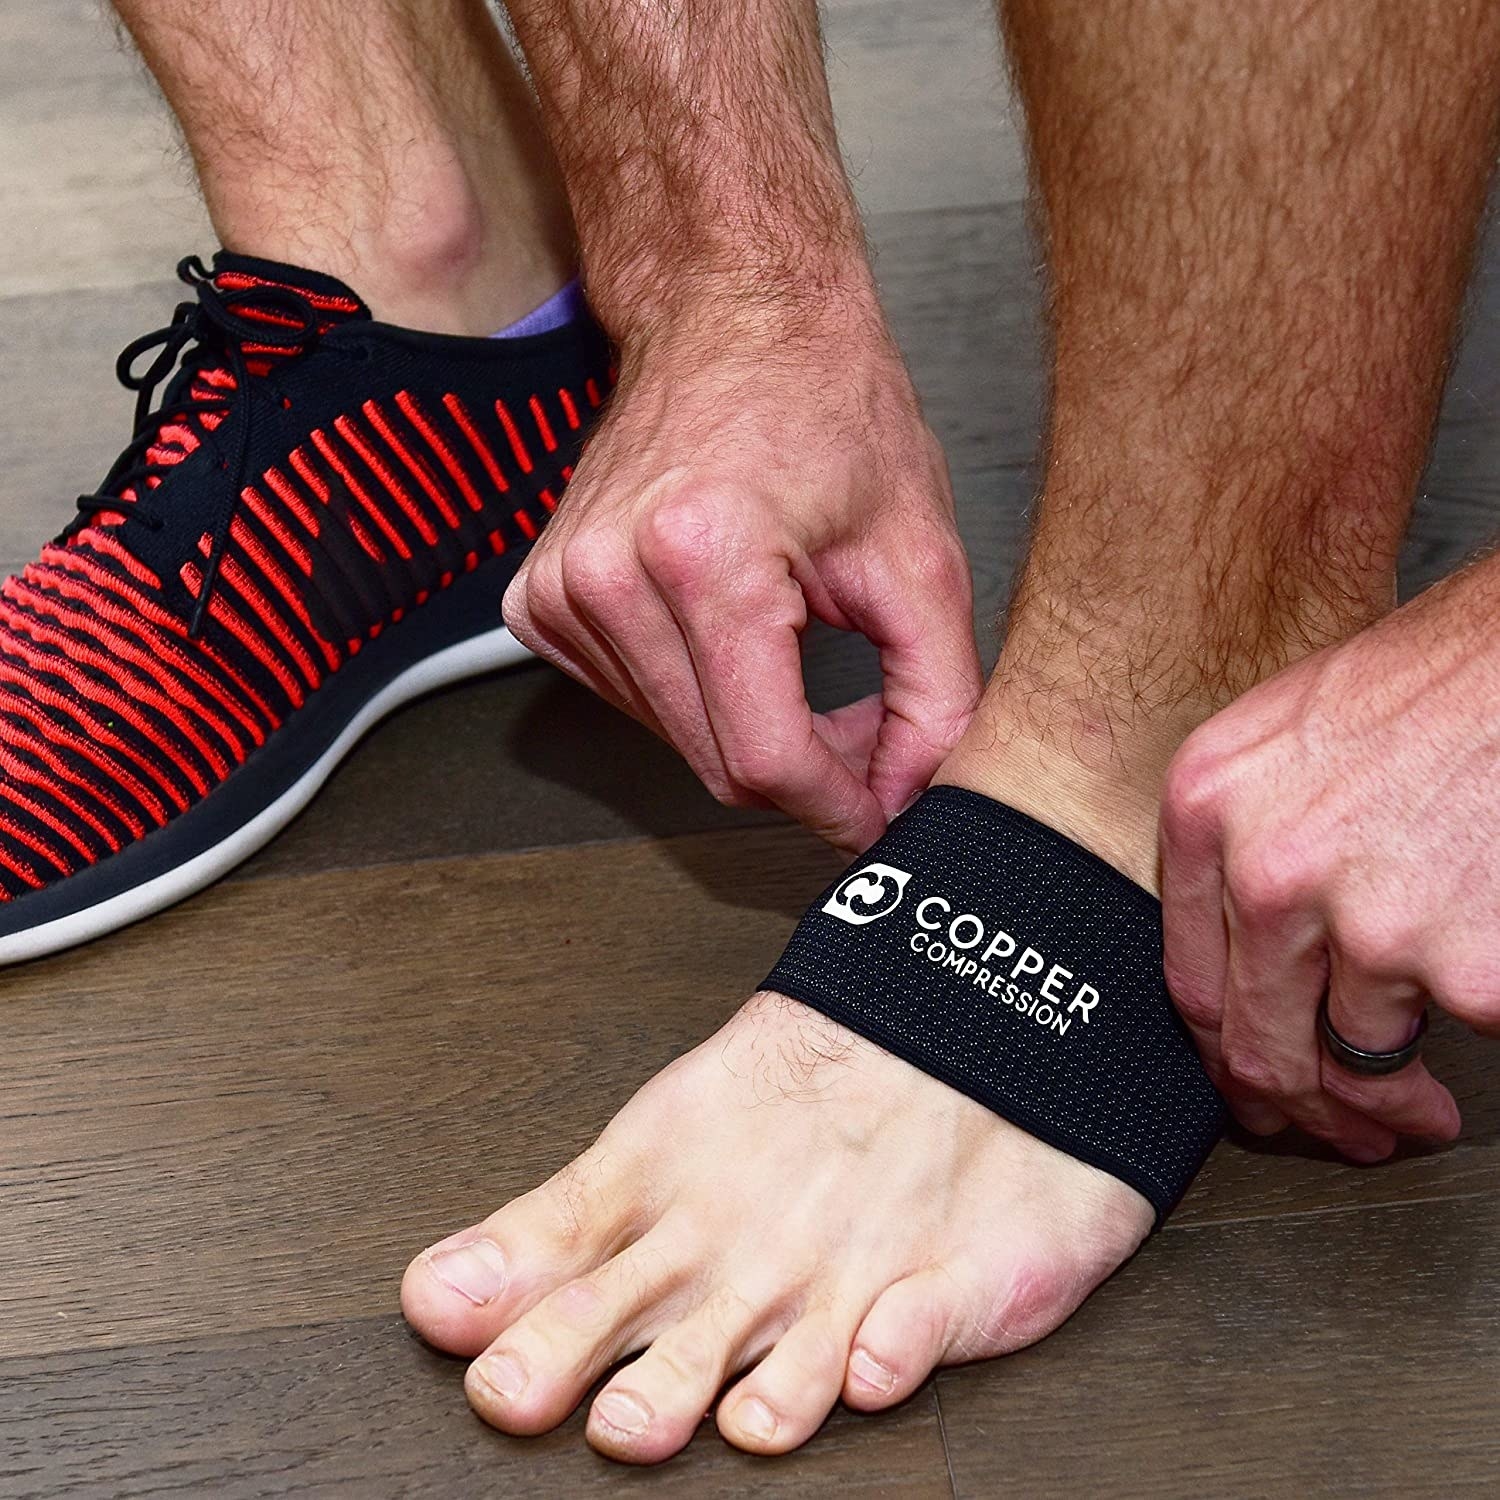 A runner wearing the supports on their foot arches